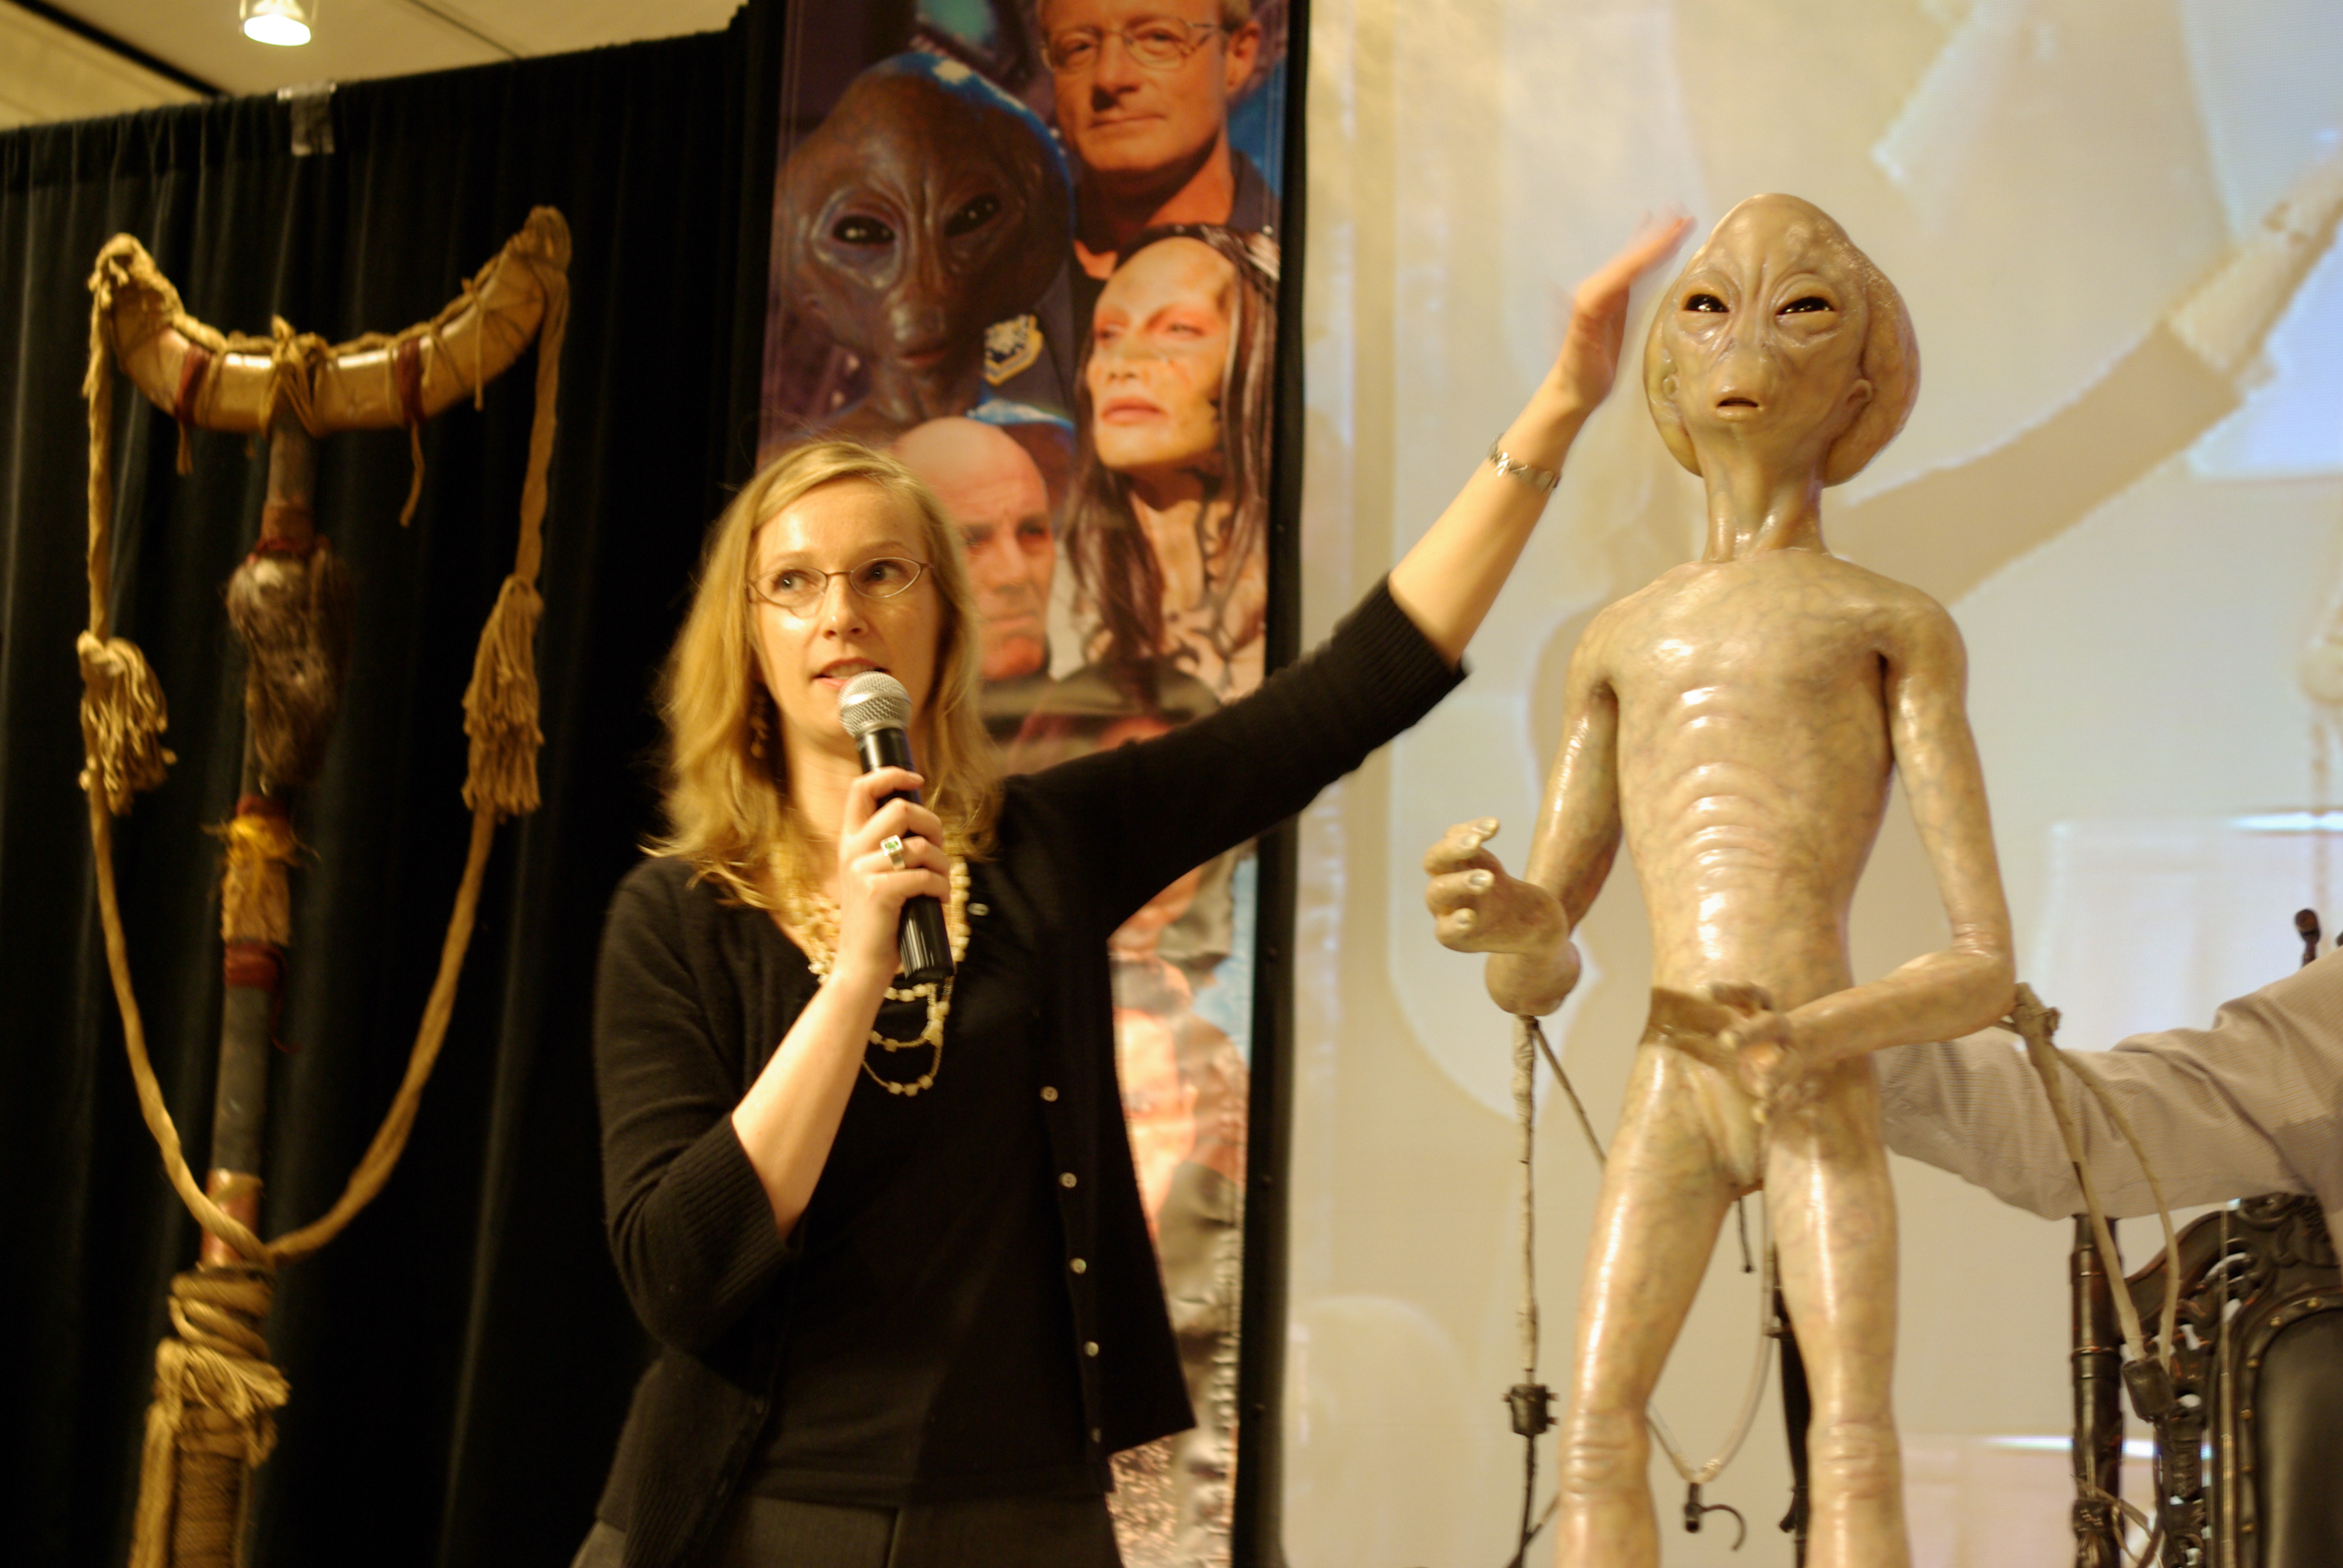 at the Stargate convention giving a talk about puppeteering the character THOR.